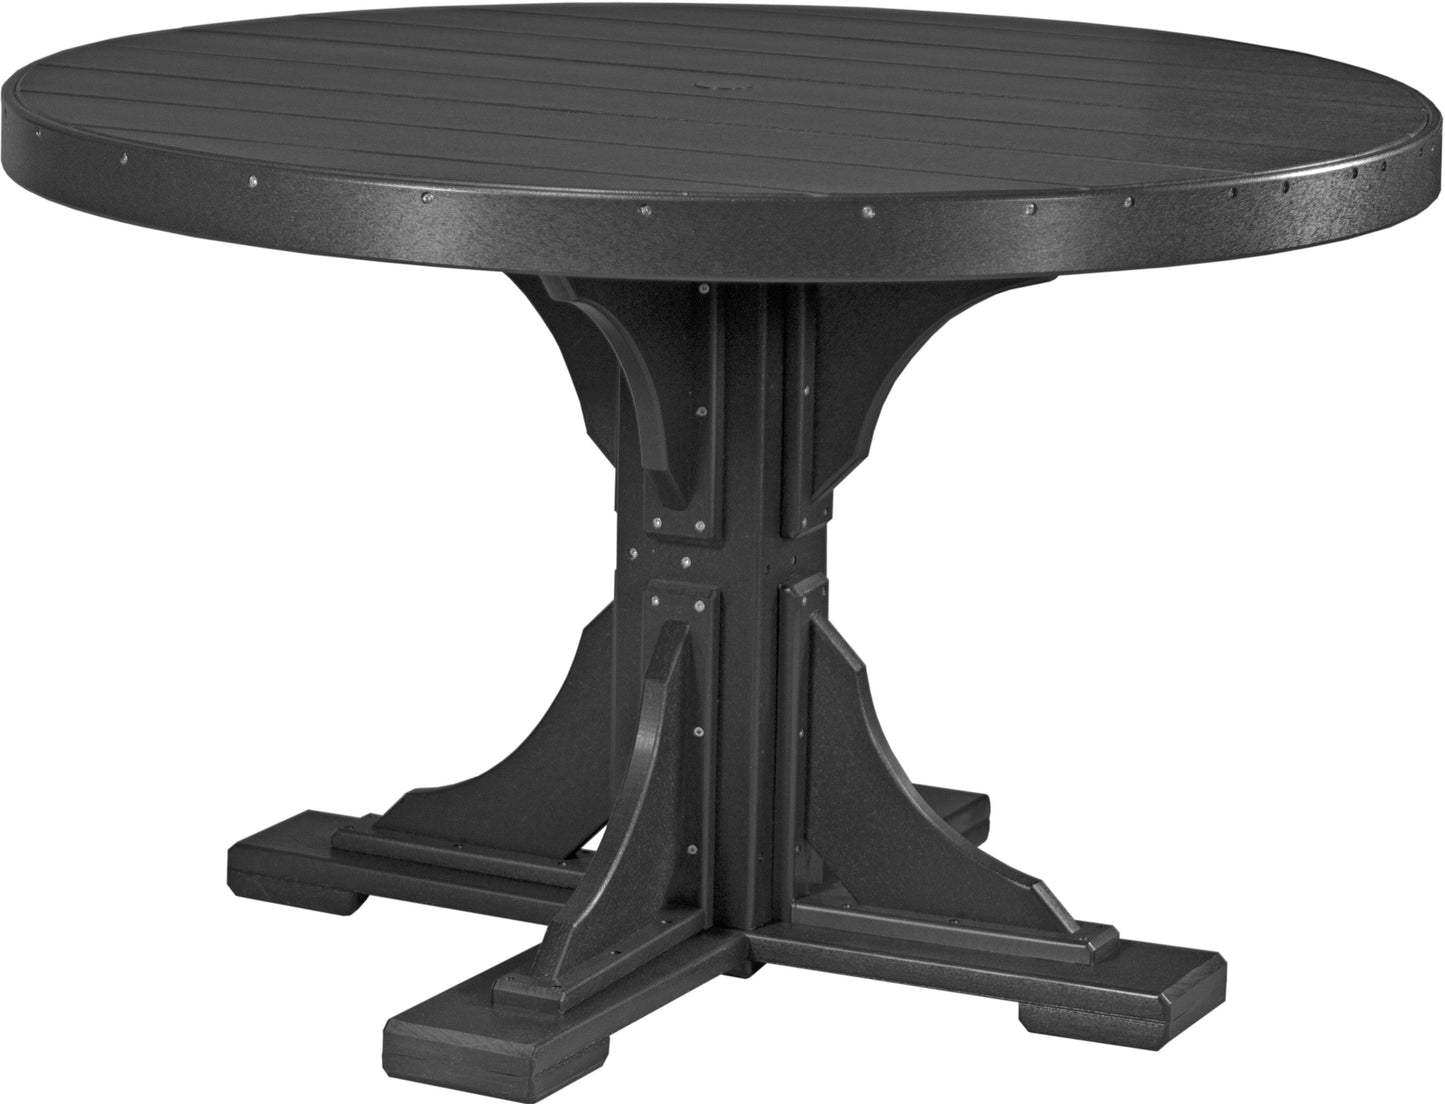 Luxcraft Recycled Plastic 4' Round Table (DINING HEIGHT) - LEAD TIME TO SHIP 3 TO 4 WEEKS